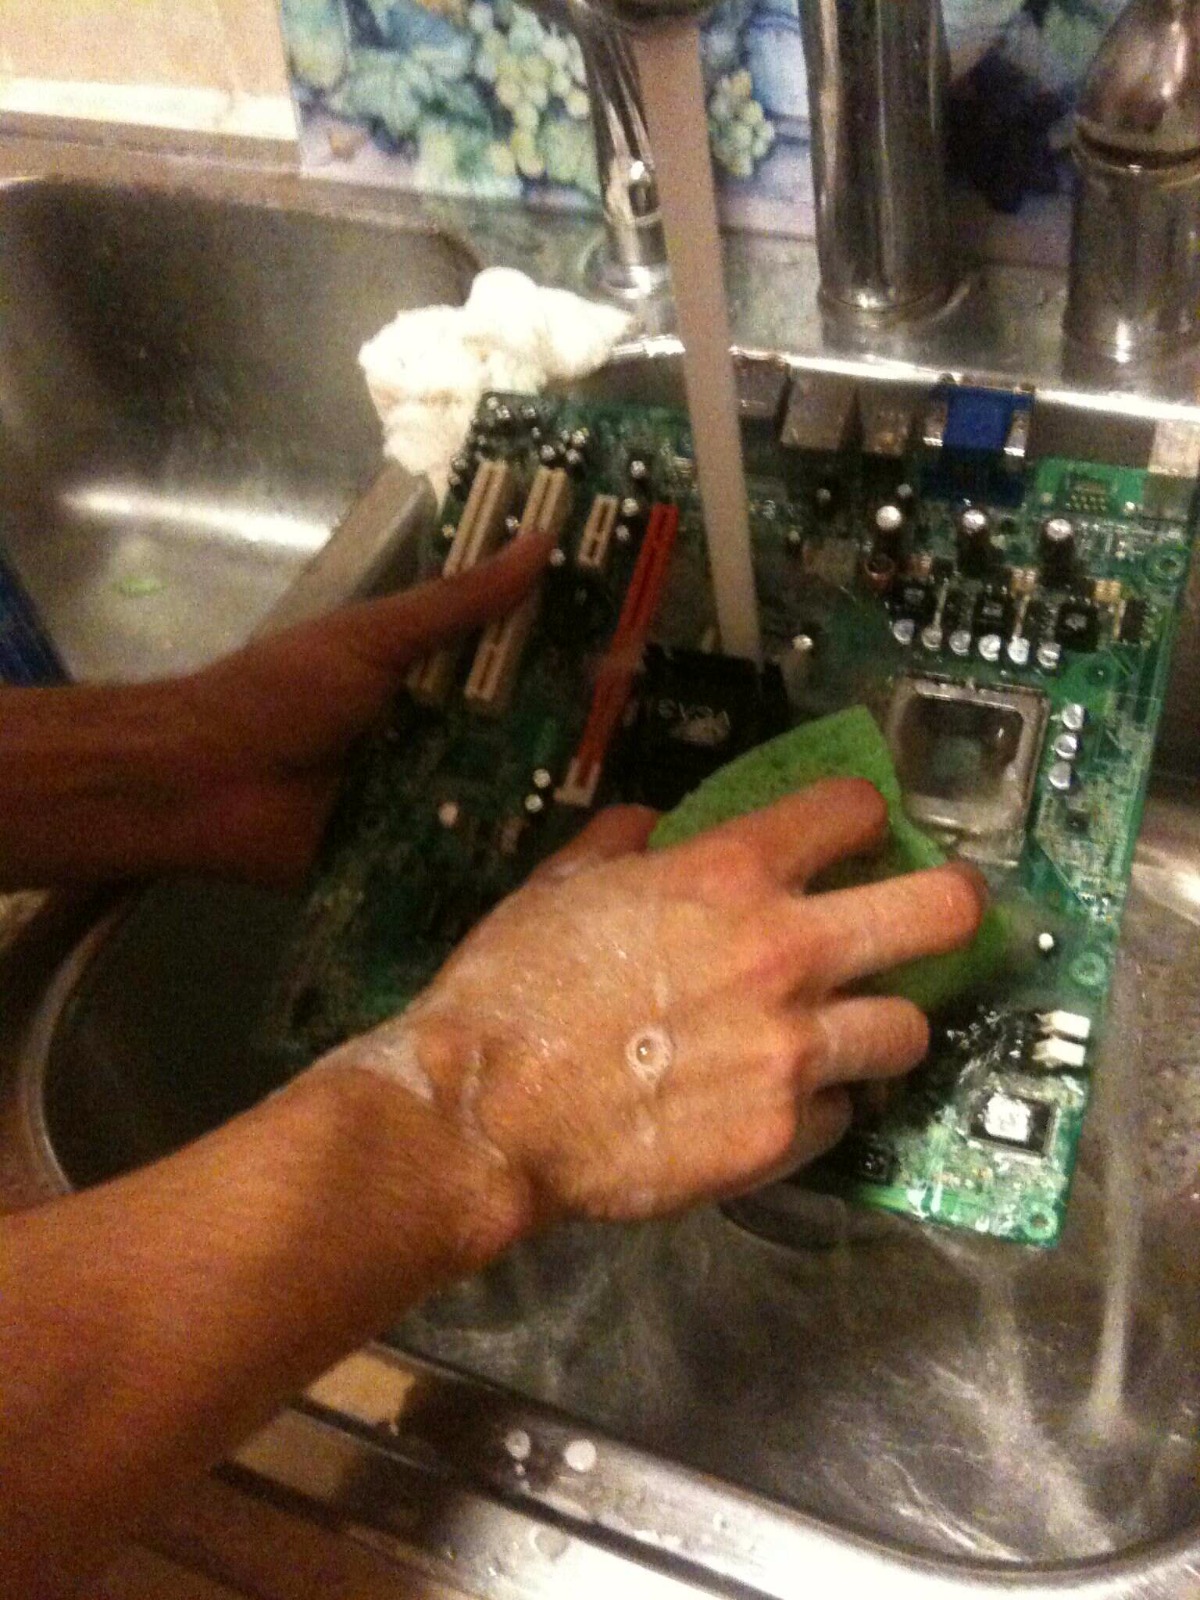 wash your motherboard